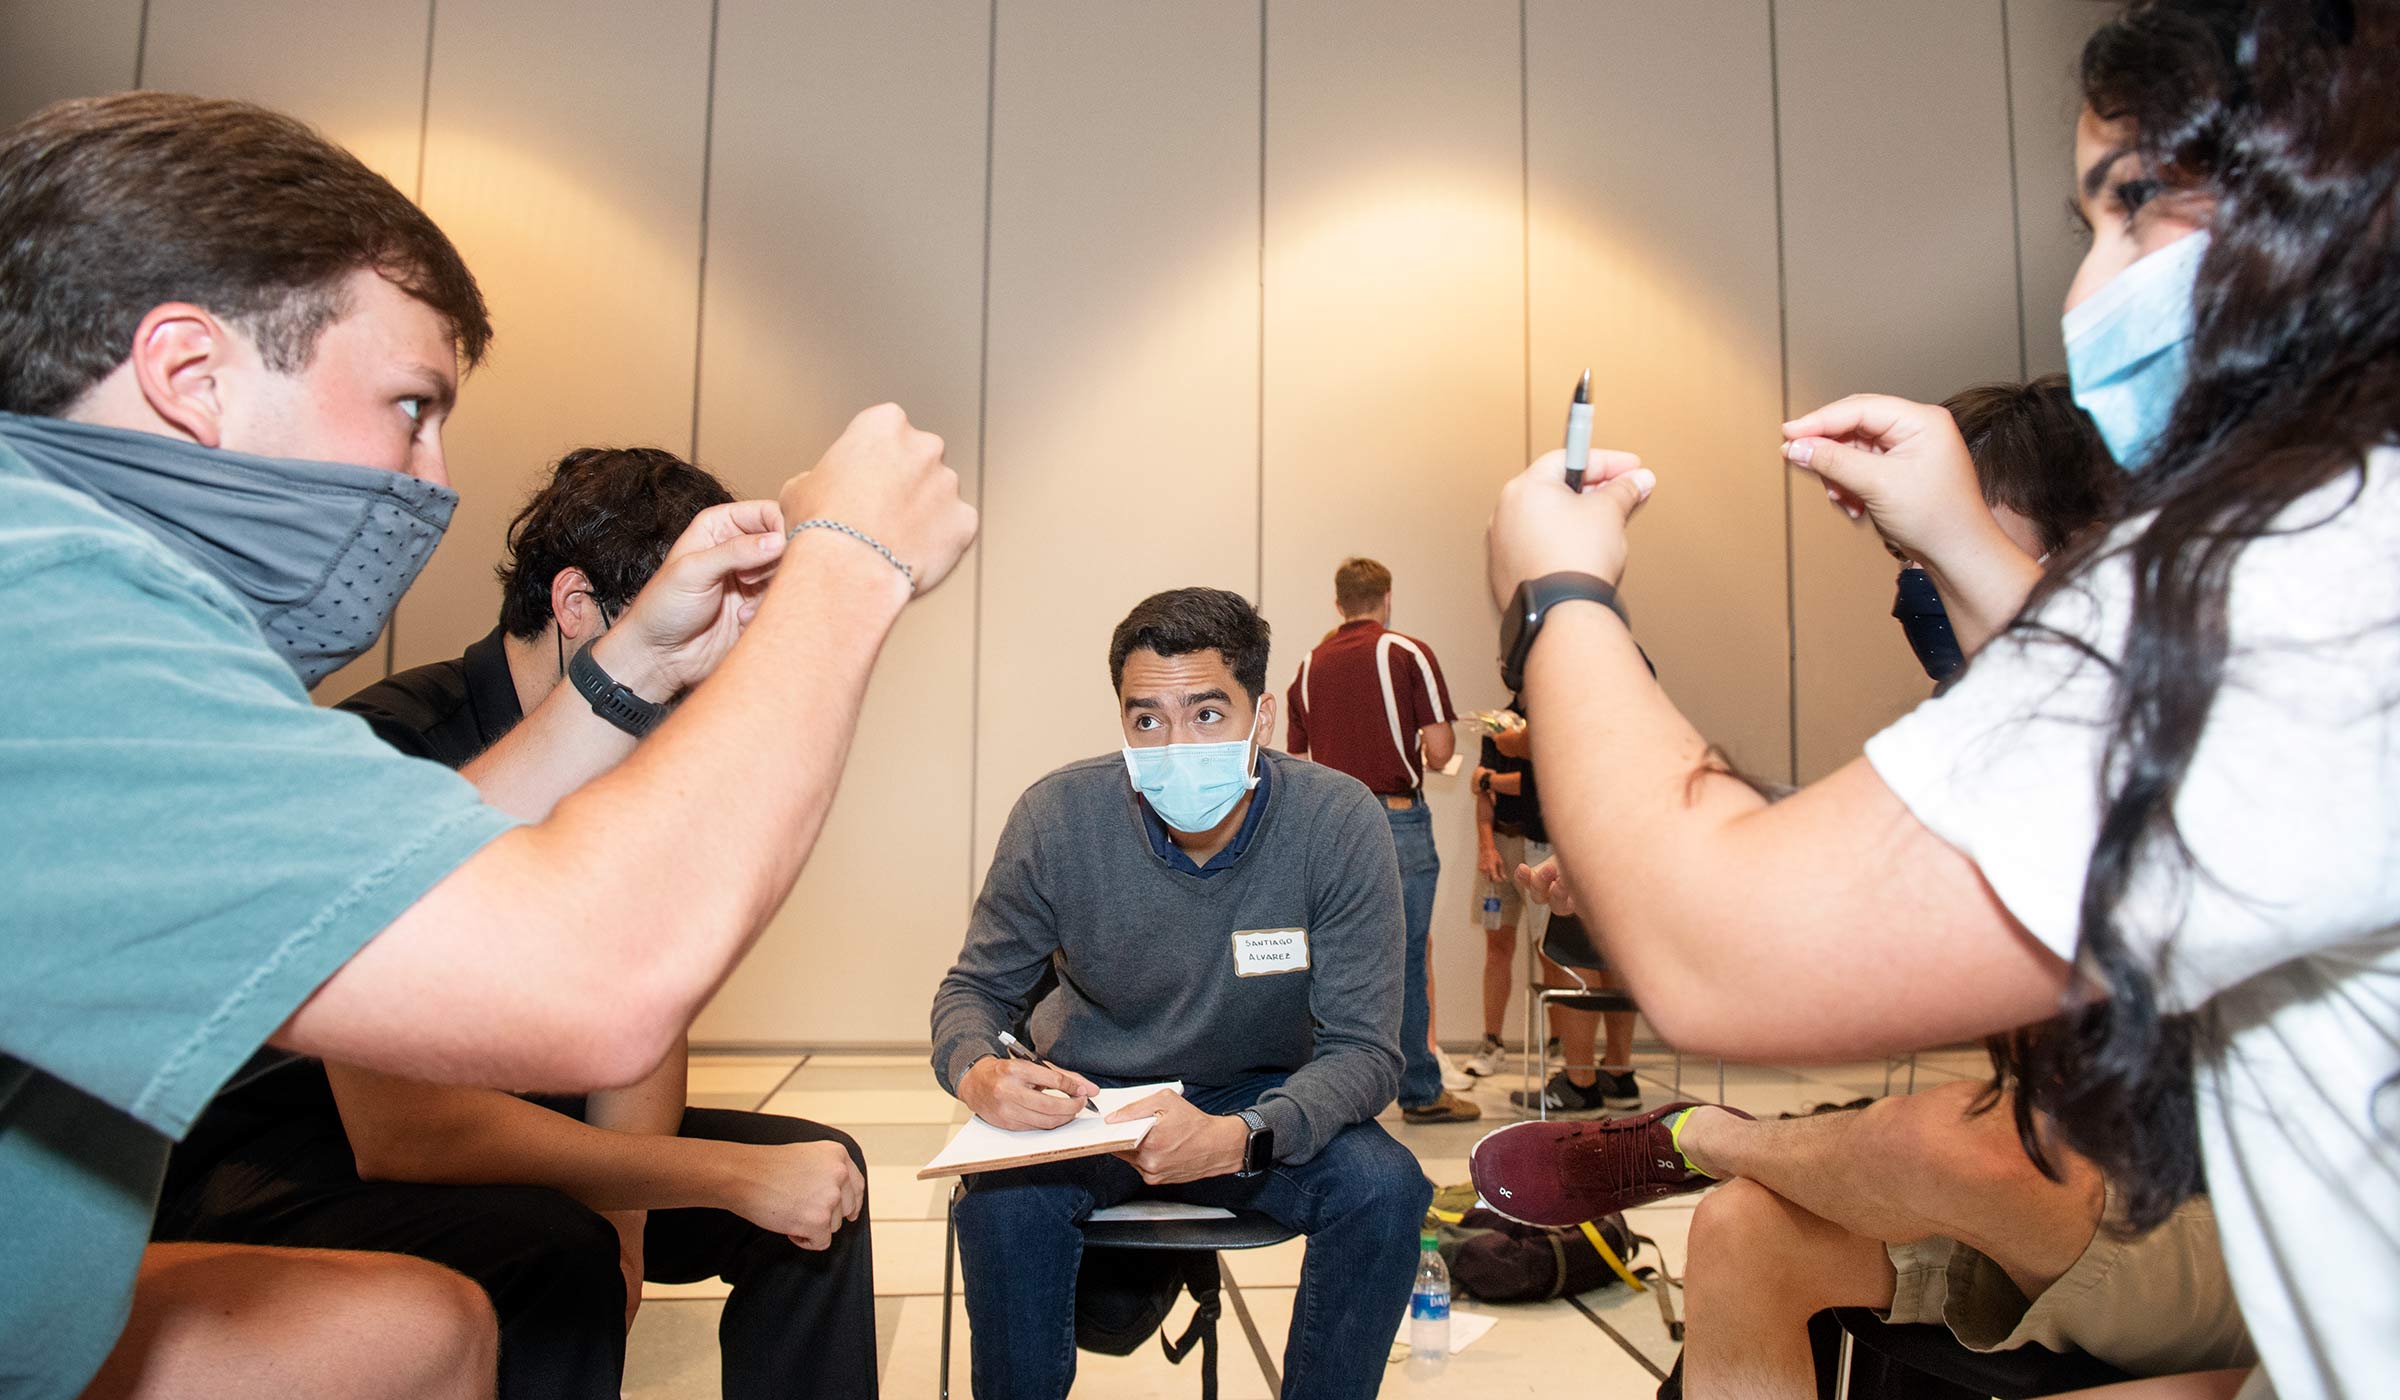 Masked students attempting to communicate an idea to onlooking student in gray sweater with notepad.